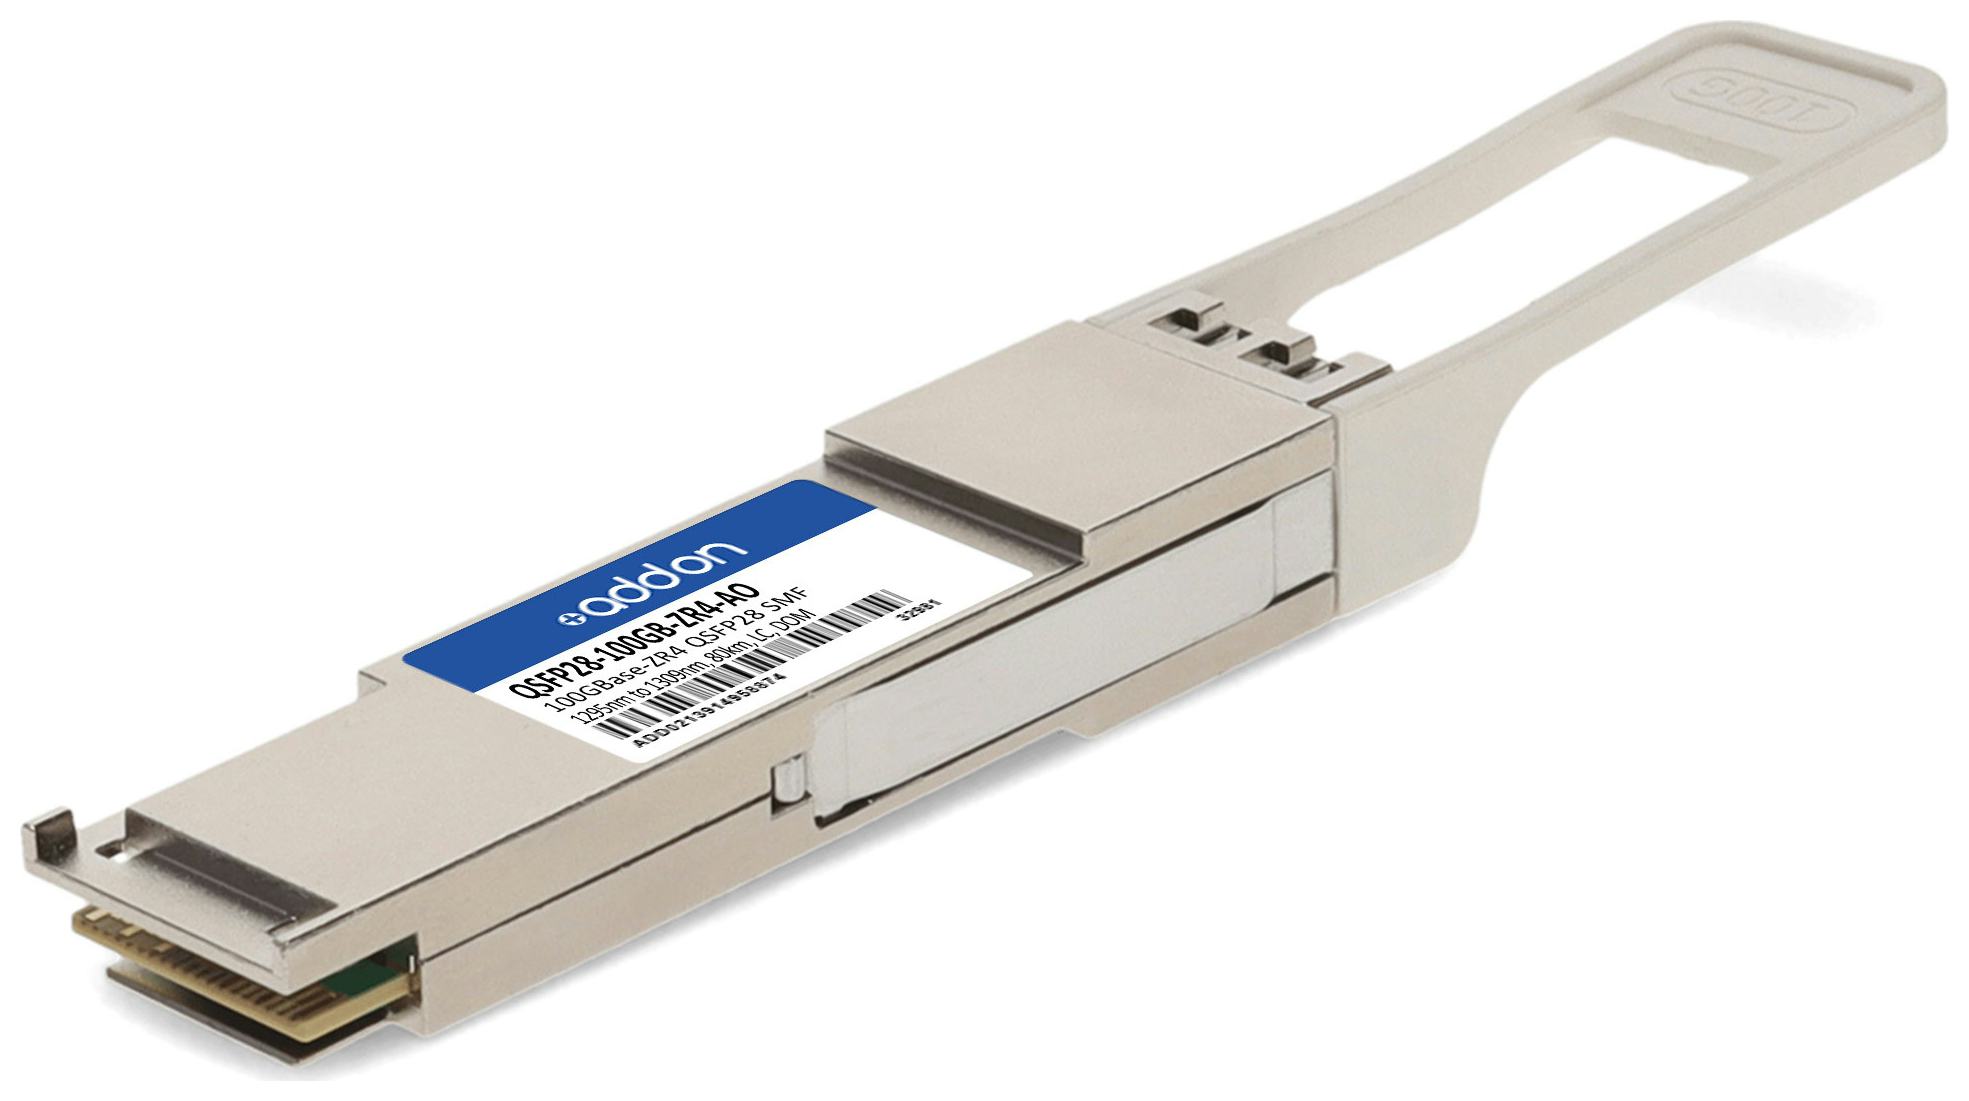 Solve the 100G to 80km challenge with existing QSFP28 infrastructure